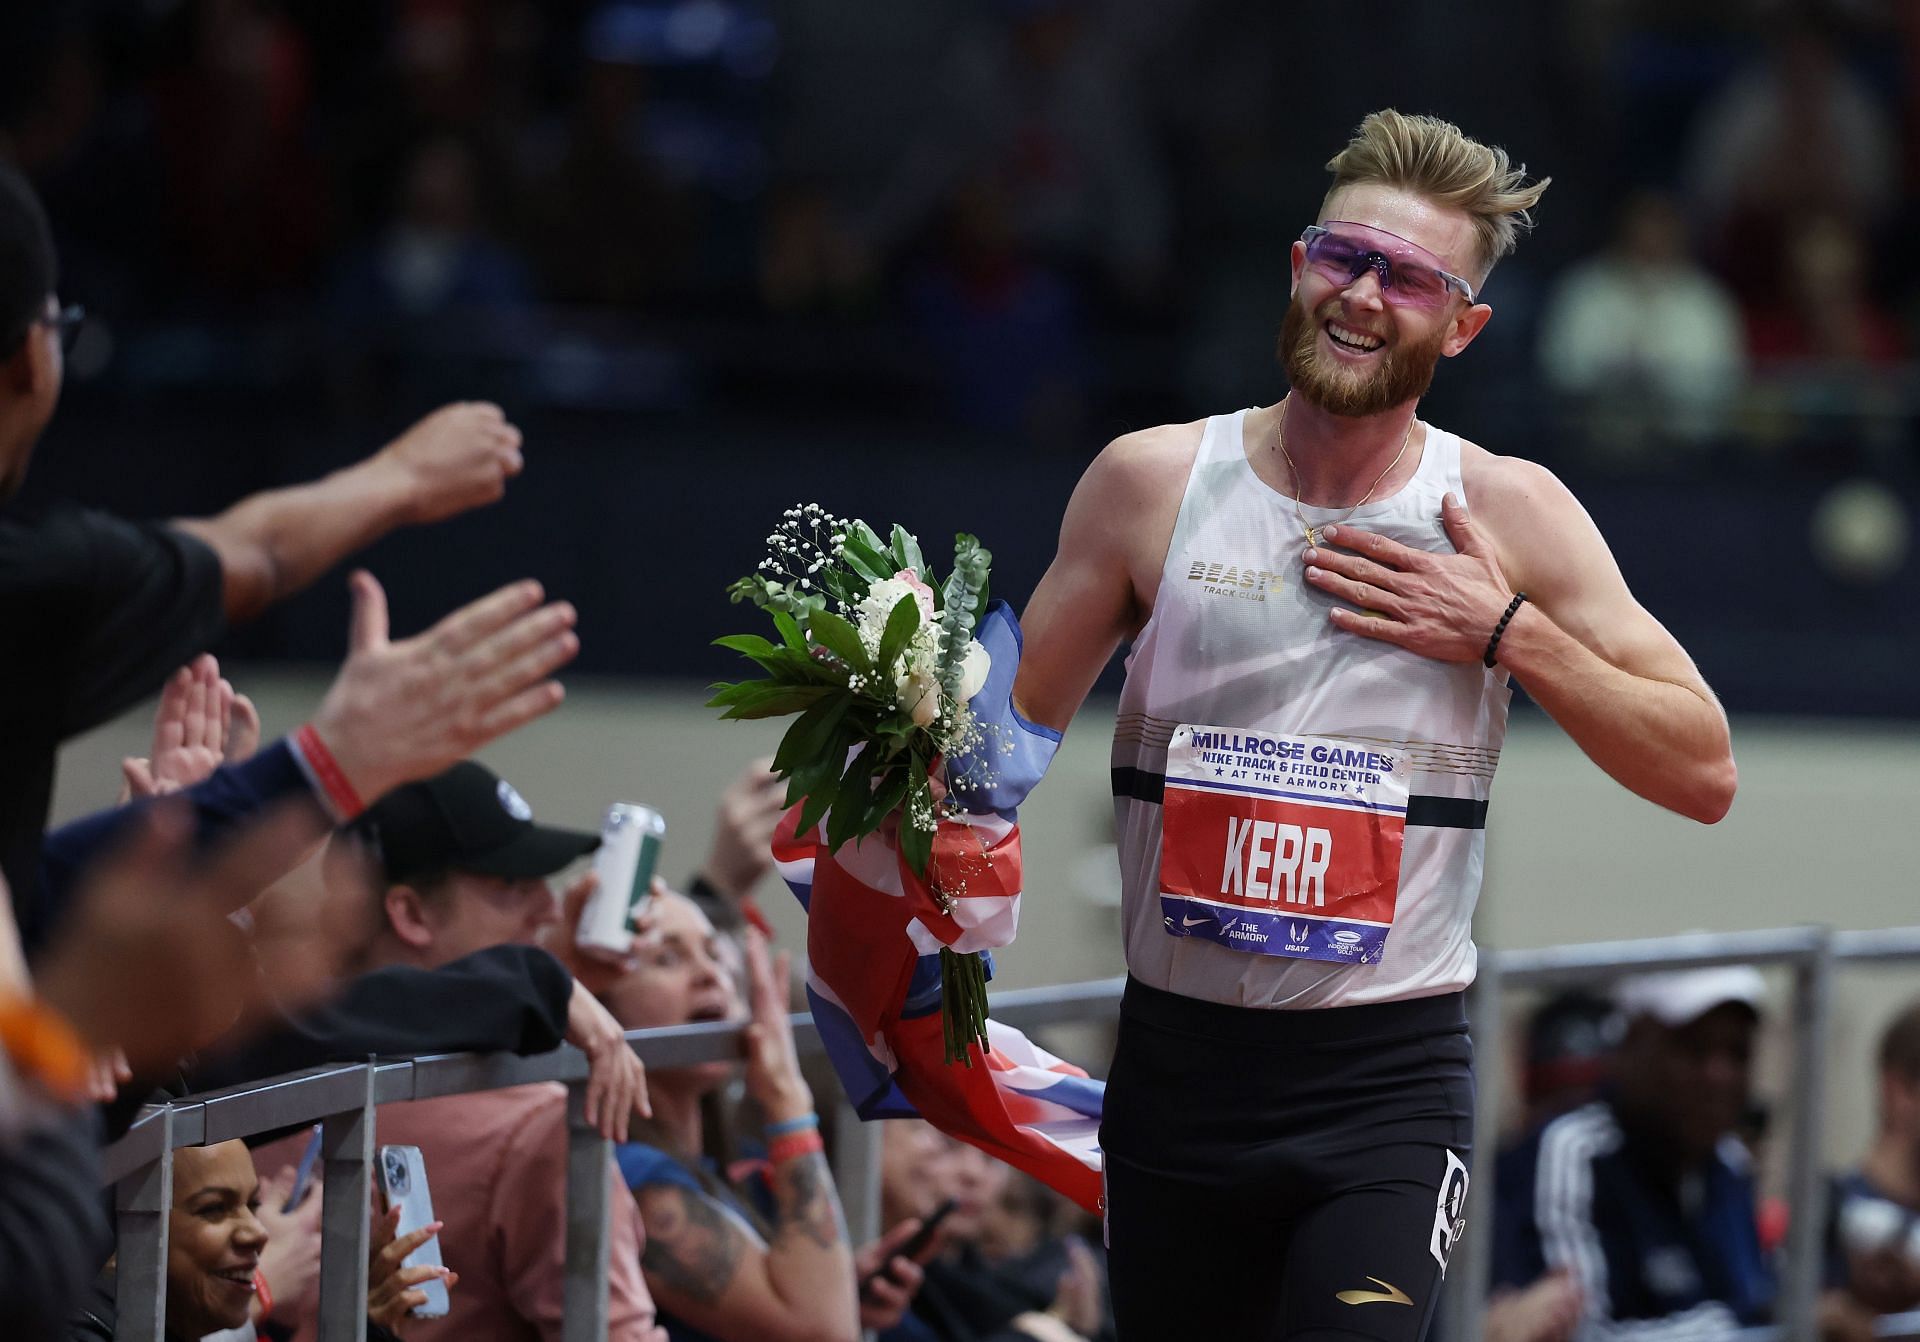 Josh Kerr of Great Britain sets the worlds record at 8:00.67 winning the Dr. Sander Men&#039;s 2 Mile during the 116th Millrose Games at The Armory Track on February 11, 2024 in New York City. (Photo by Al Bello/Getty Images)